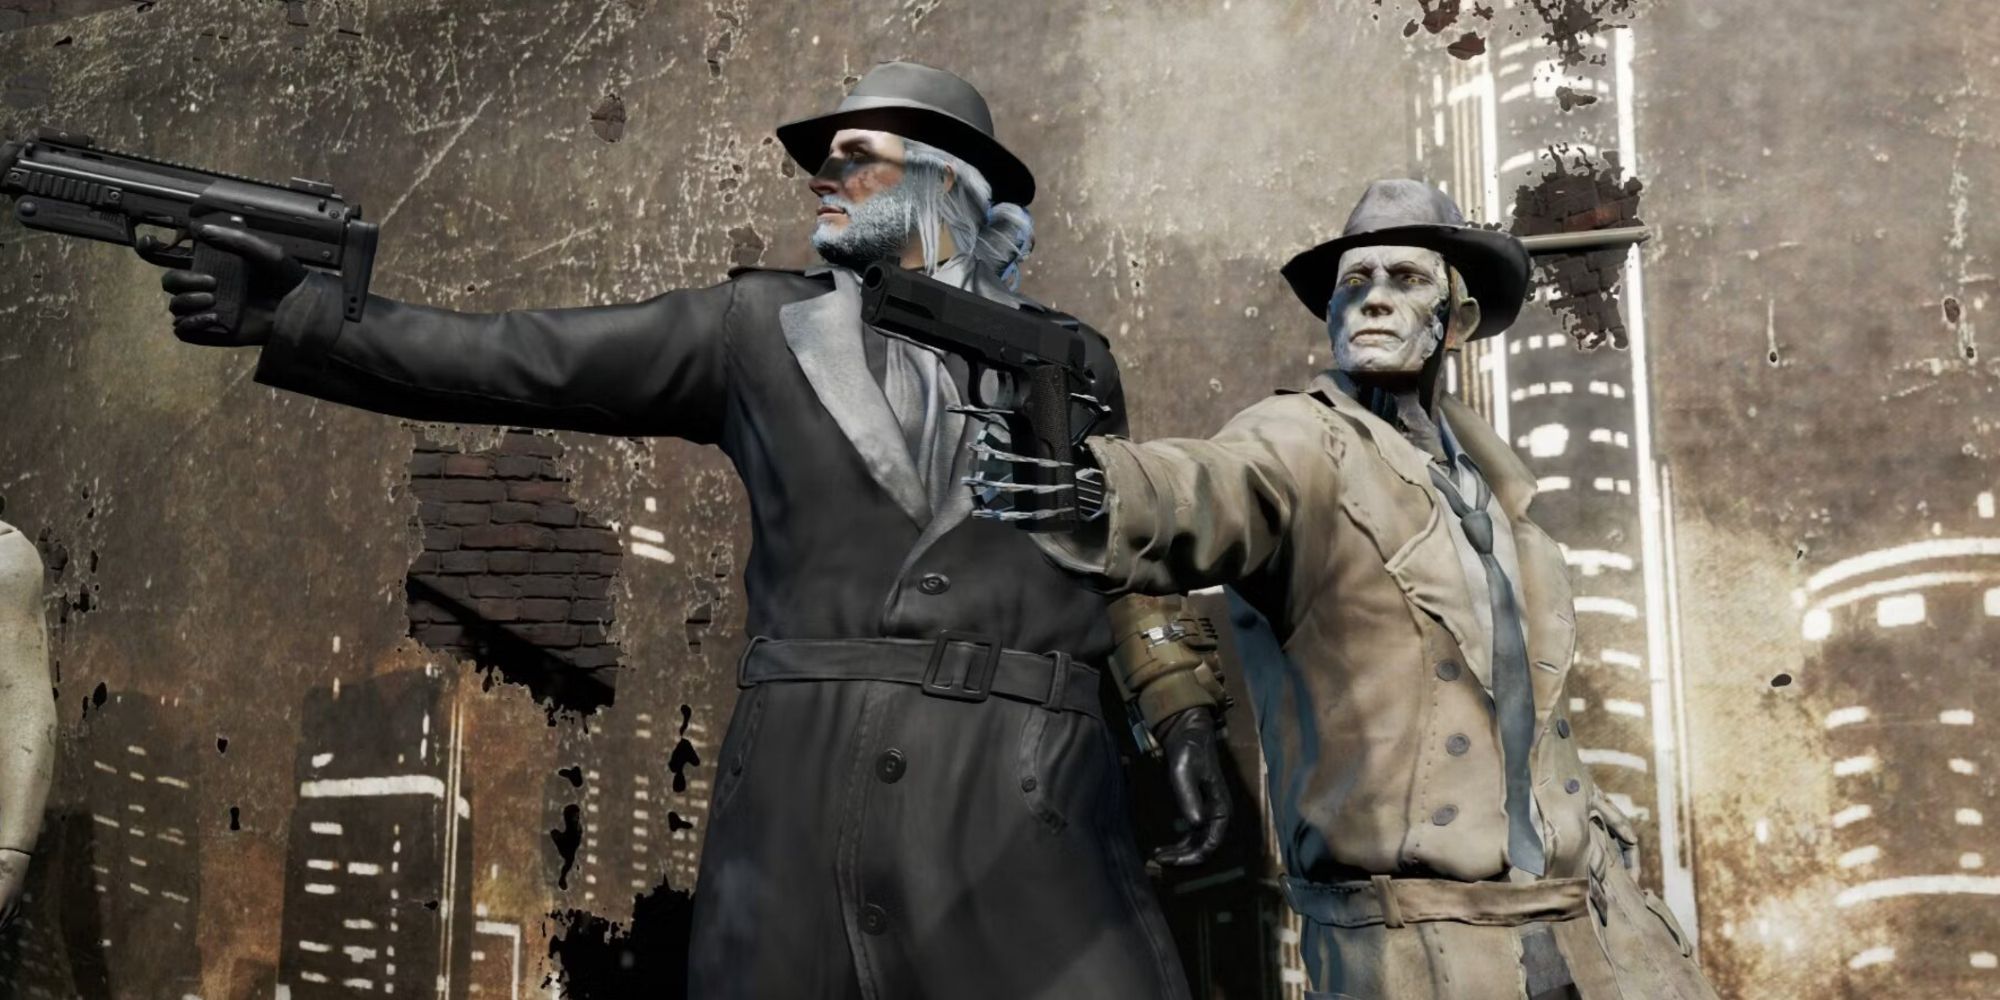 Player character wearing the Silver Shroud uniform standing next to companion Nick Valentine in Fallout 4